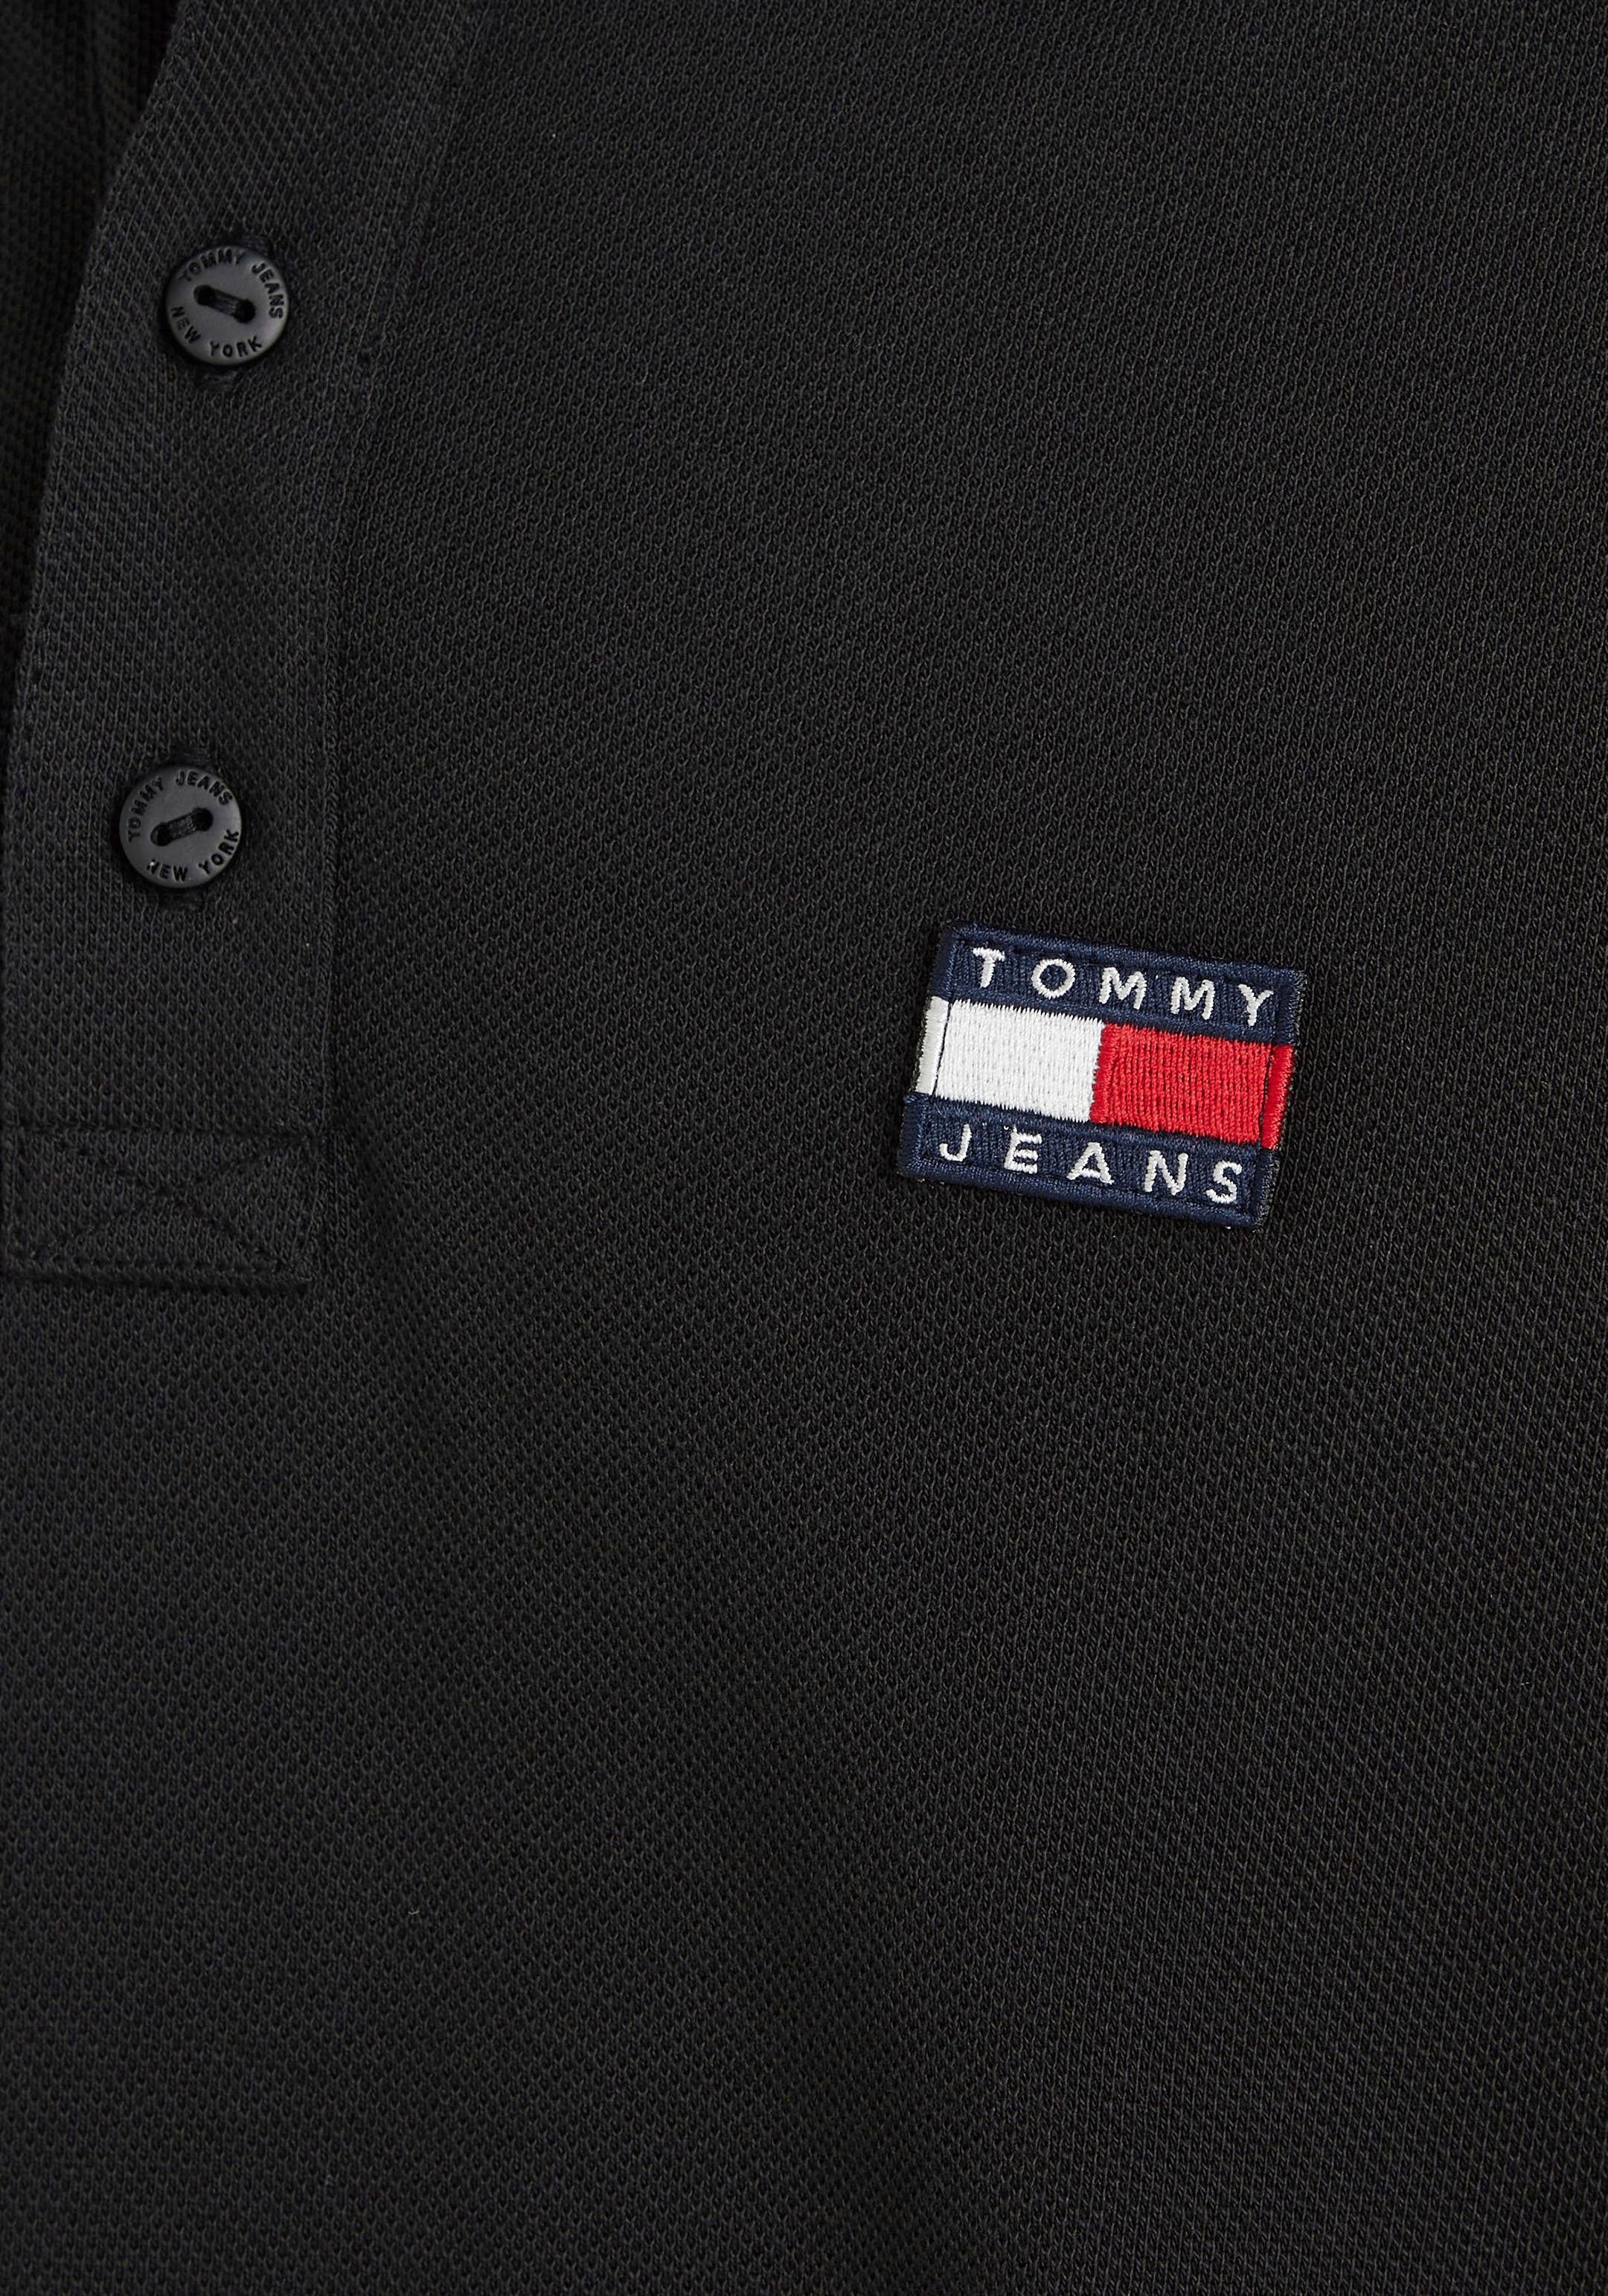 Tommy Jeans Poloshirt »TJM 3-Knopf-Form XS mit POLO«, ♕ BADGE CLSC bei